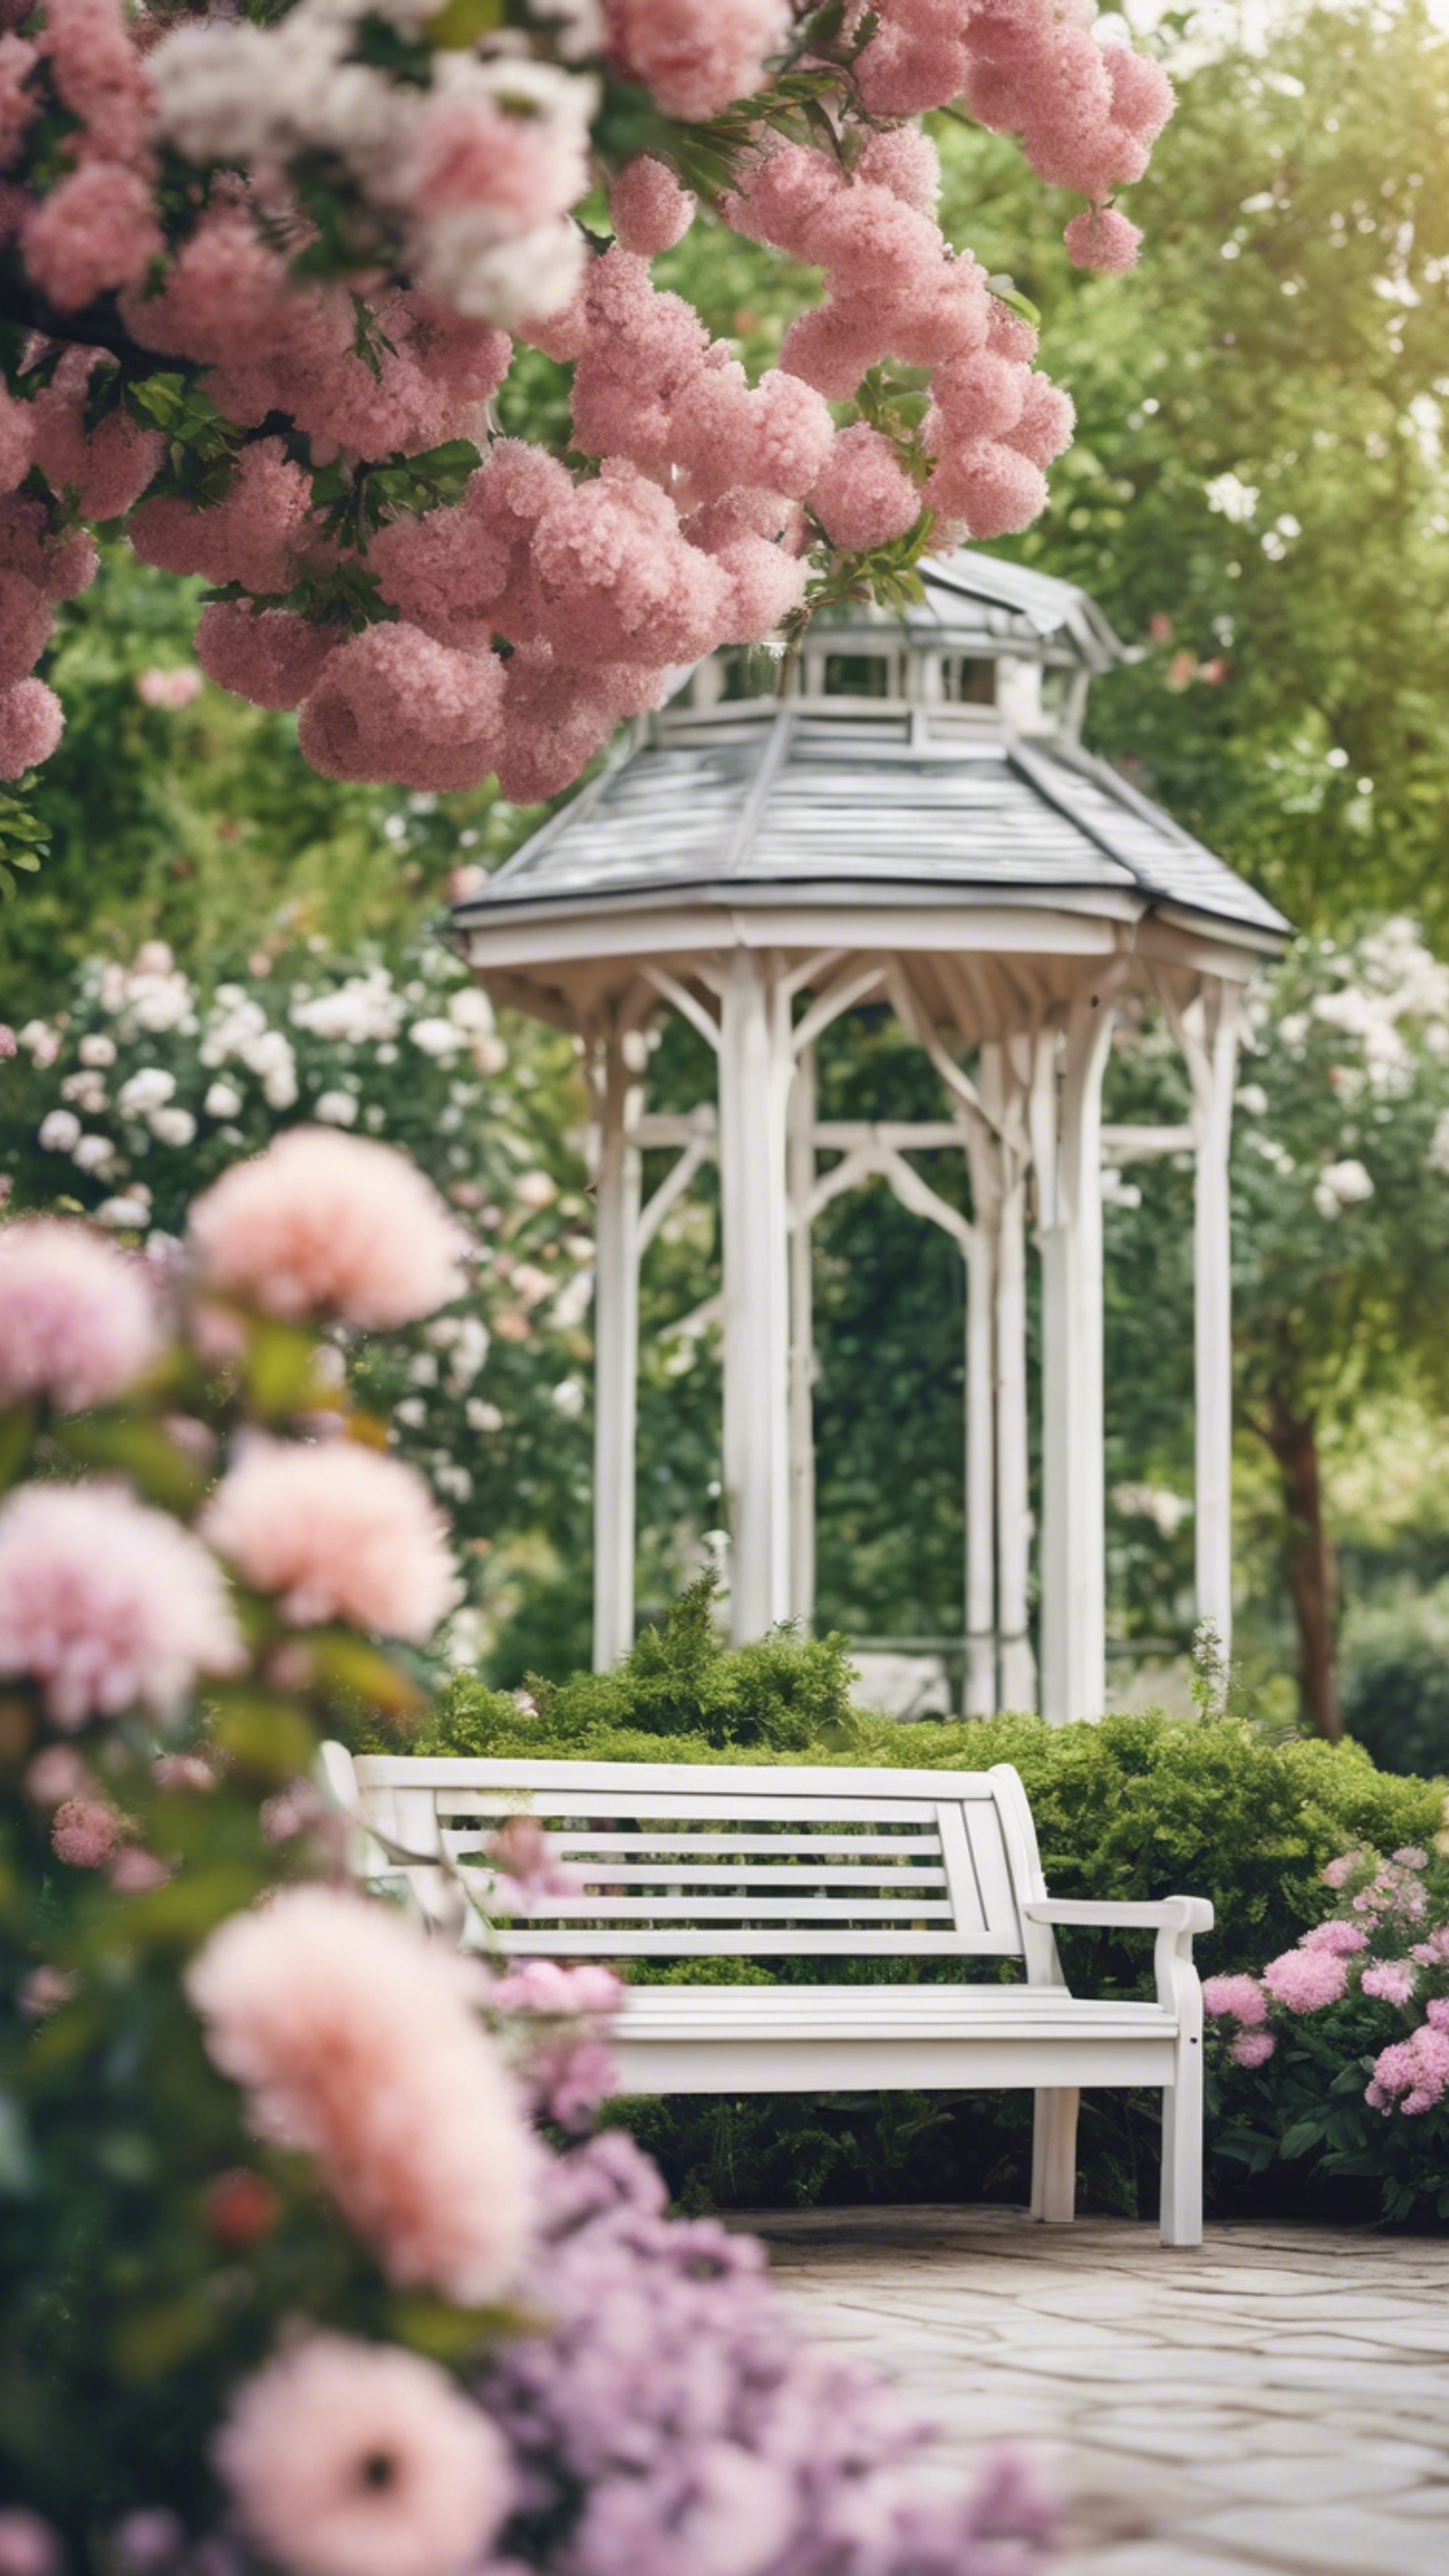 A charming summer garden with a preppy style garden bench, surrounded by flowers in full bloom under the white gazebo.壁紙[66d37d8478ca425cac49]